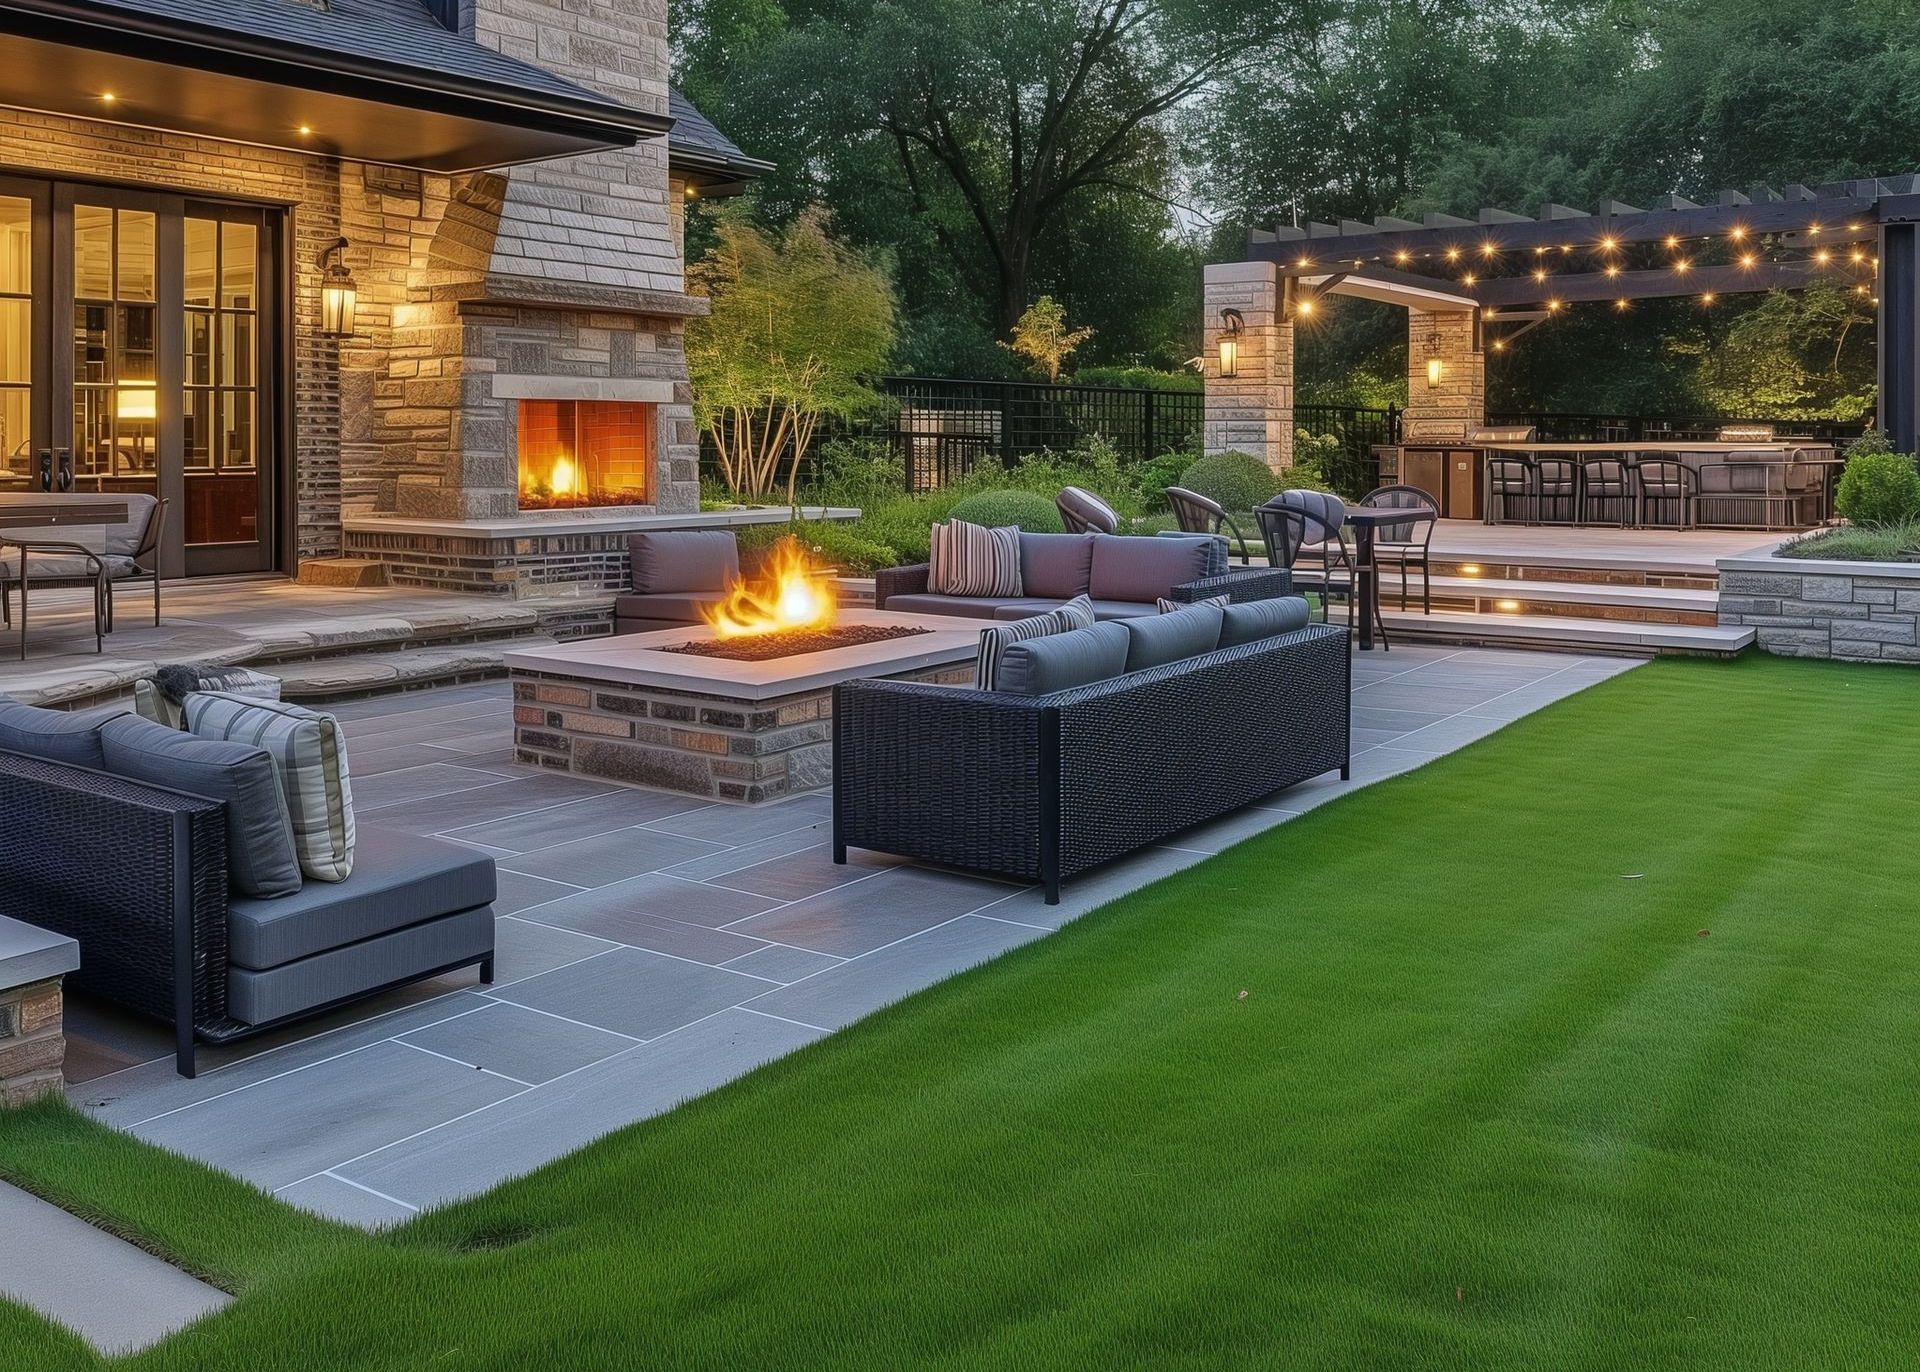 Outdoor Entertainment Spaces: Bringing Fun to Your Backyard